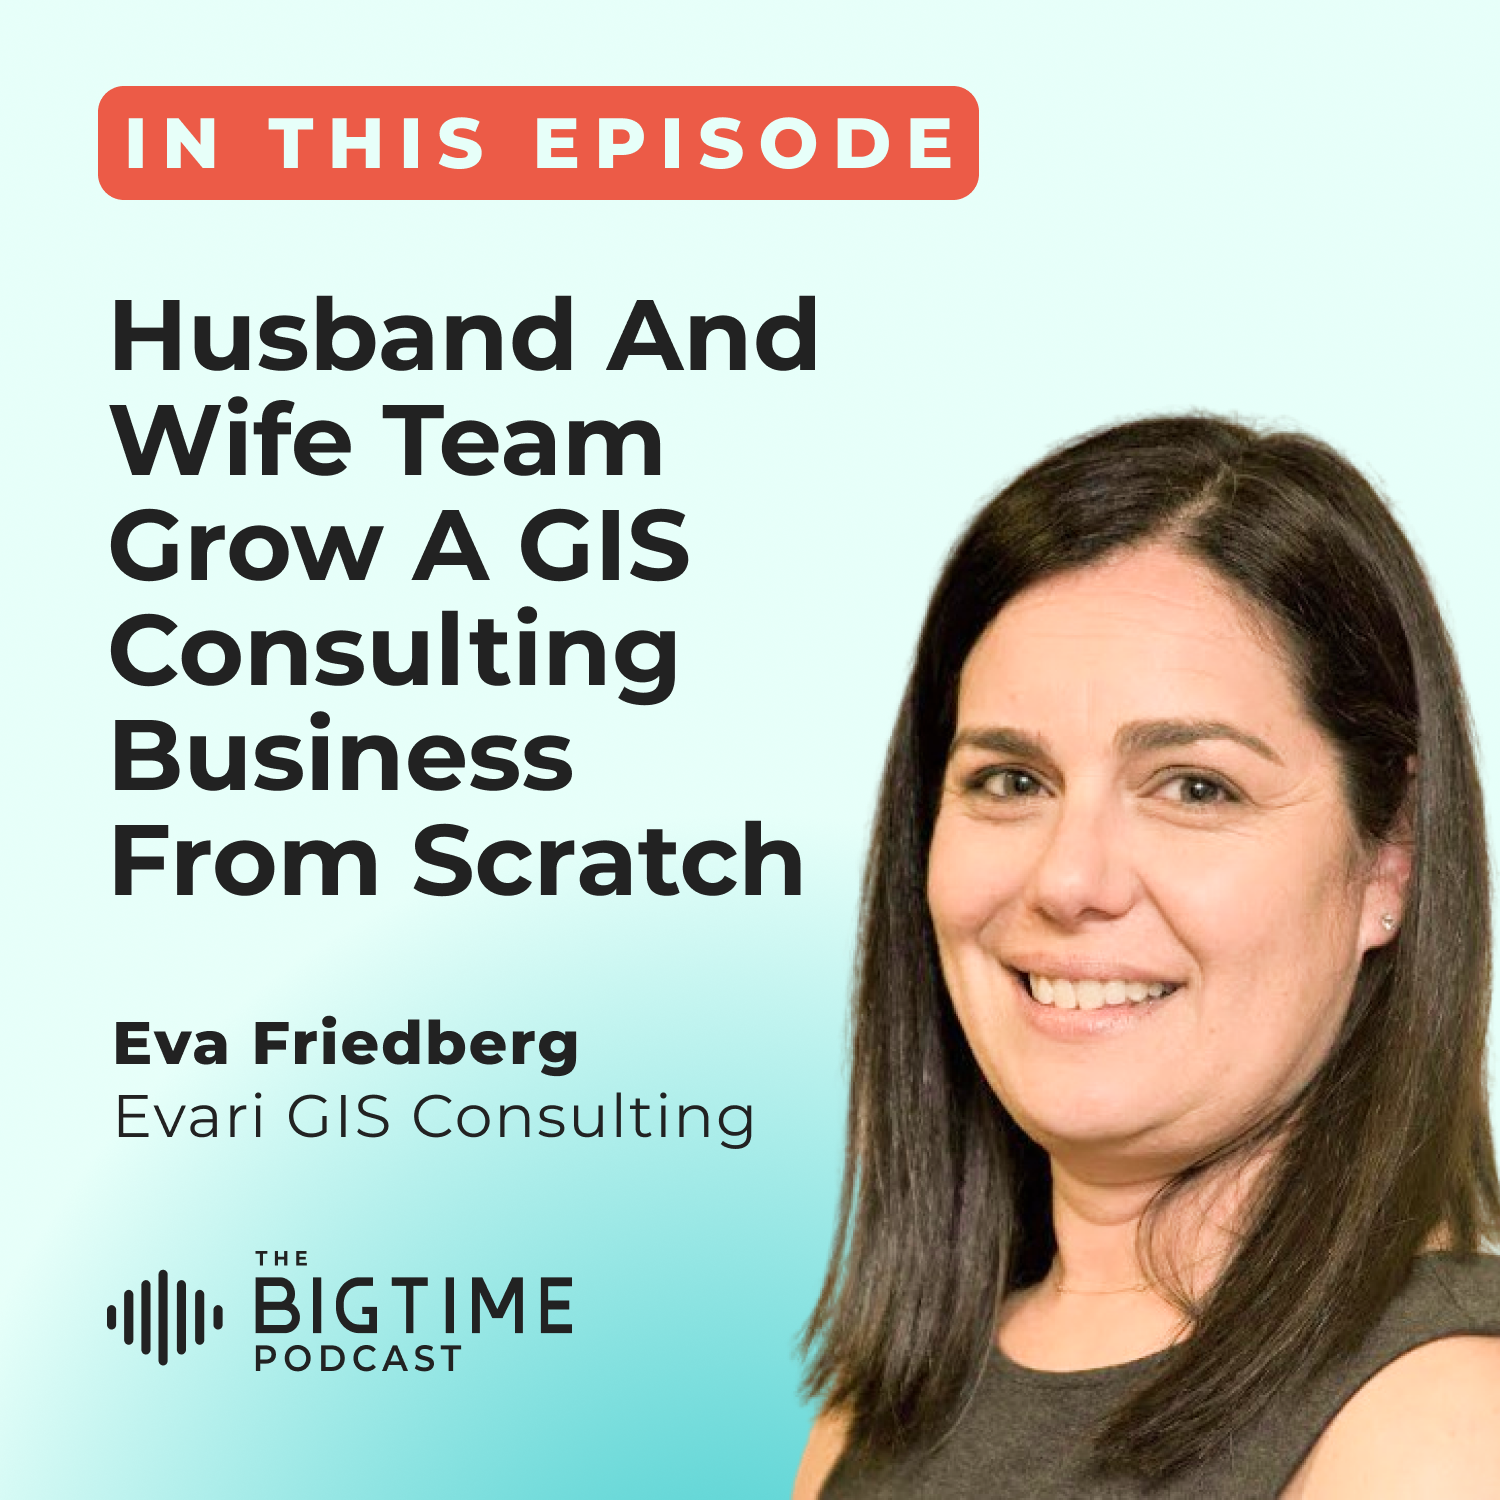 Husband and Wife Team Grow a GIS Consulting Business from Scratch